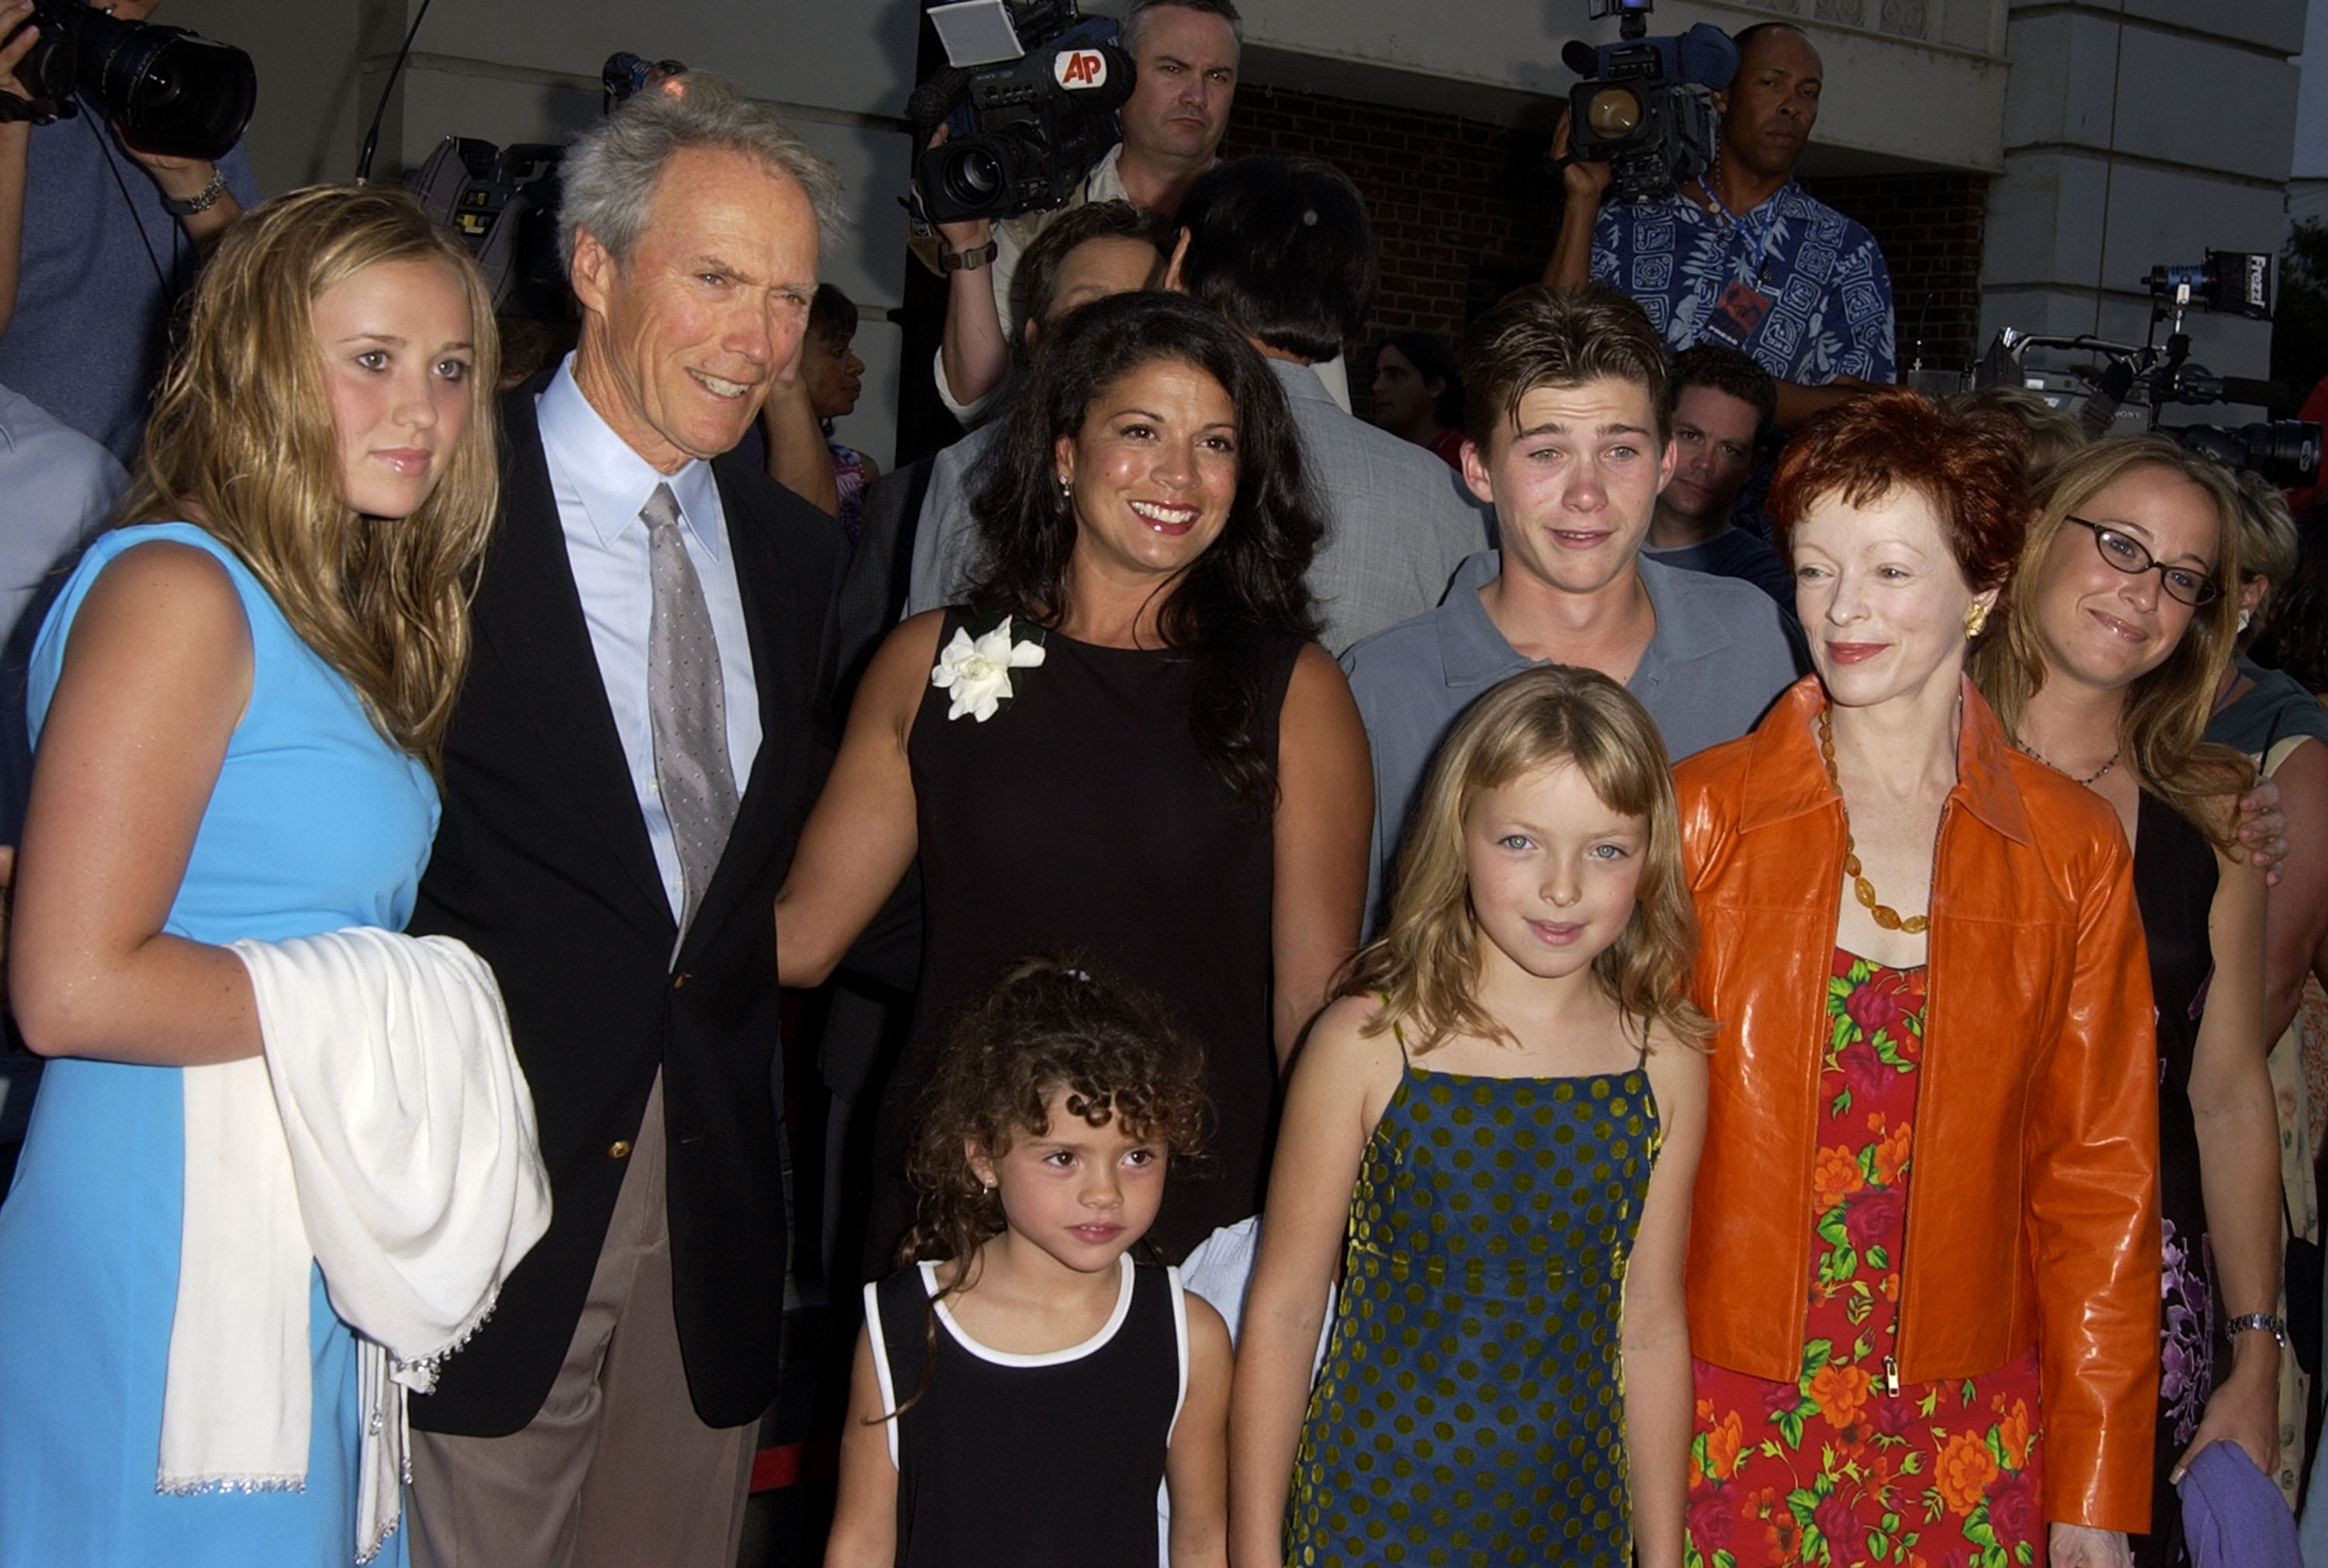 Clint Eastwood, Dina Eastwood, and Frances Fisher with children Scott, Kathryn, Francesca, and Morgan at the "Blood Work" premiere on August 6, 2002. | Source: Getty Images